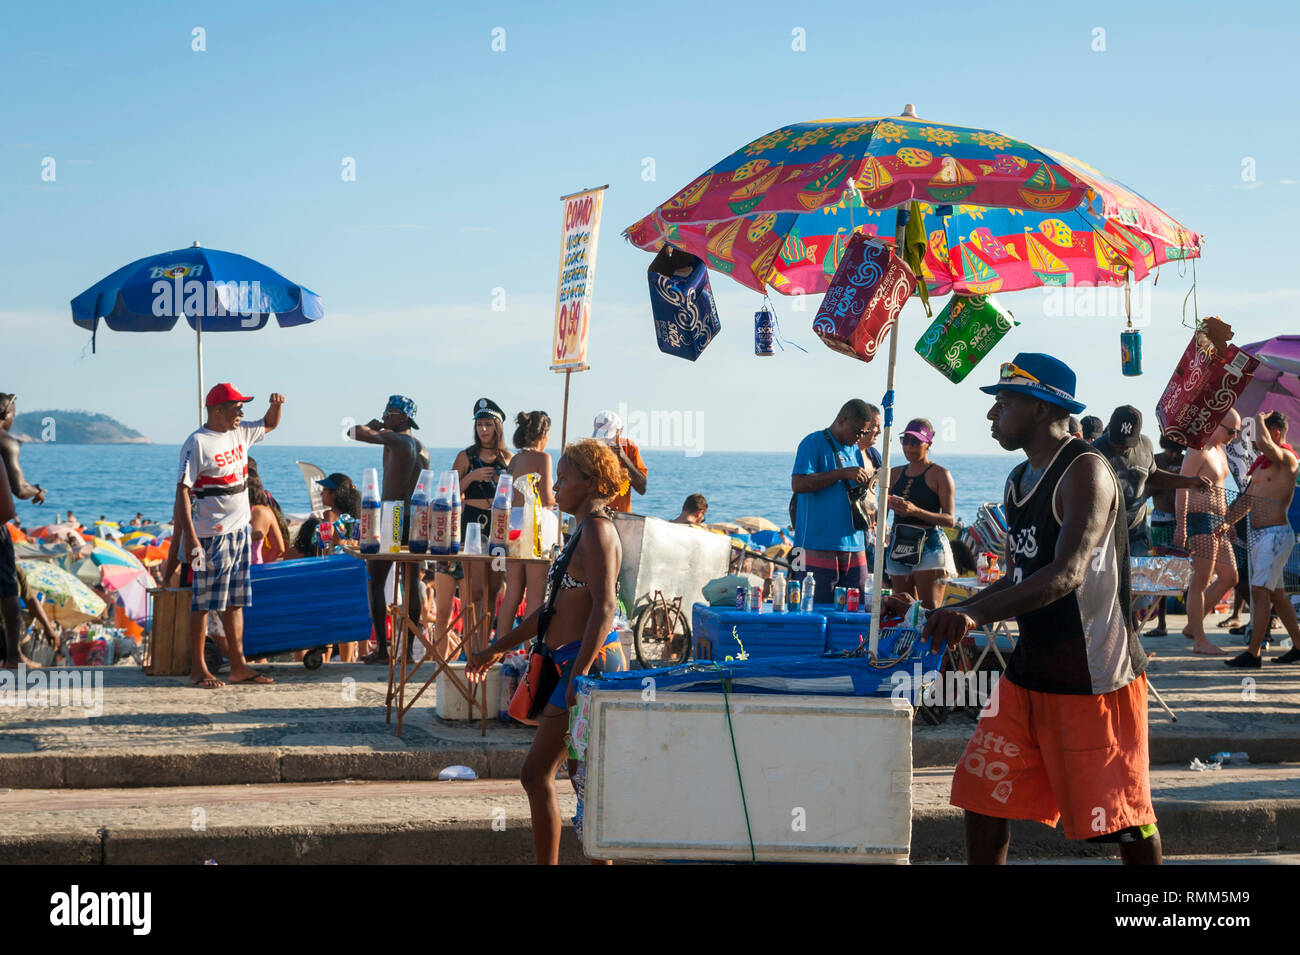 RIO DE JANEIRO - FEBRUARY 28, 2017: Unlicensed Brazilian vendors serve drinks and snacks to crowds celebrating at a Carnival street party in Ipanema. Stock Photo